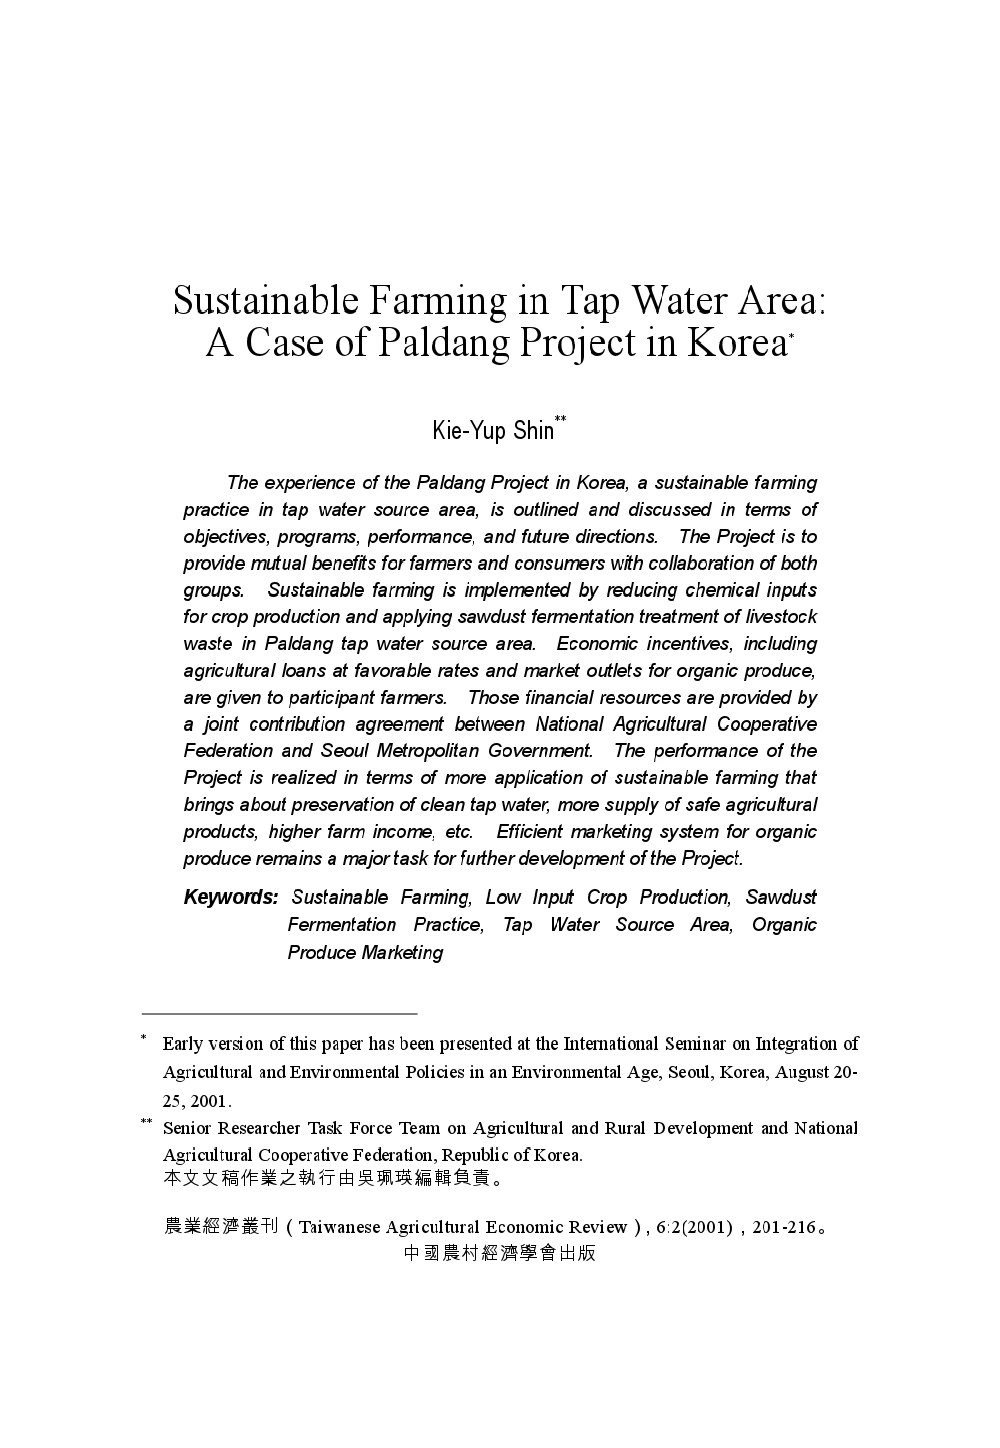 Sustainable_Farming_in_Tap_Water_Area.jpg